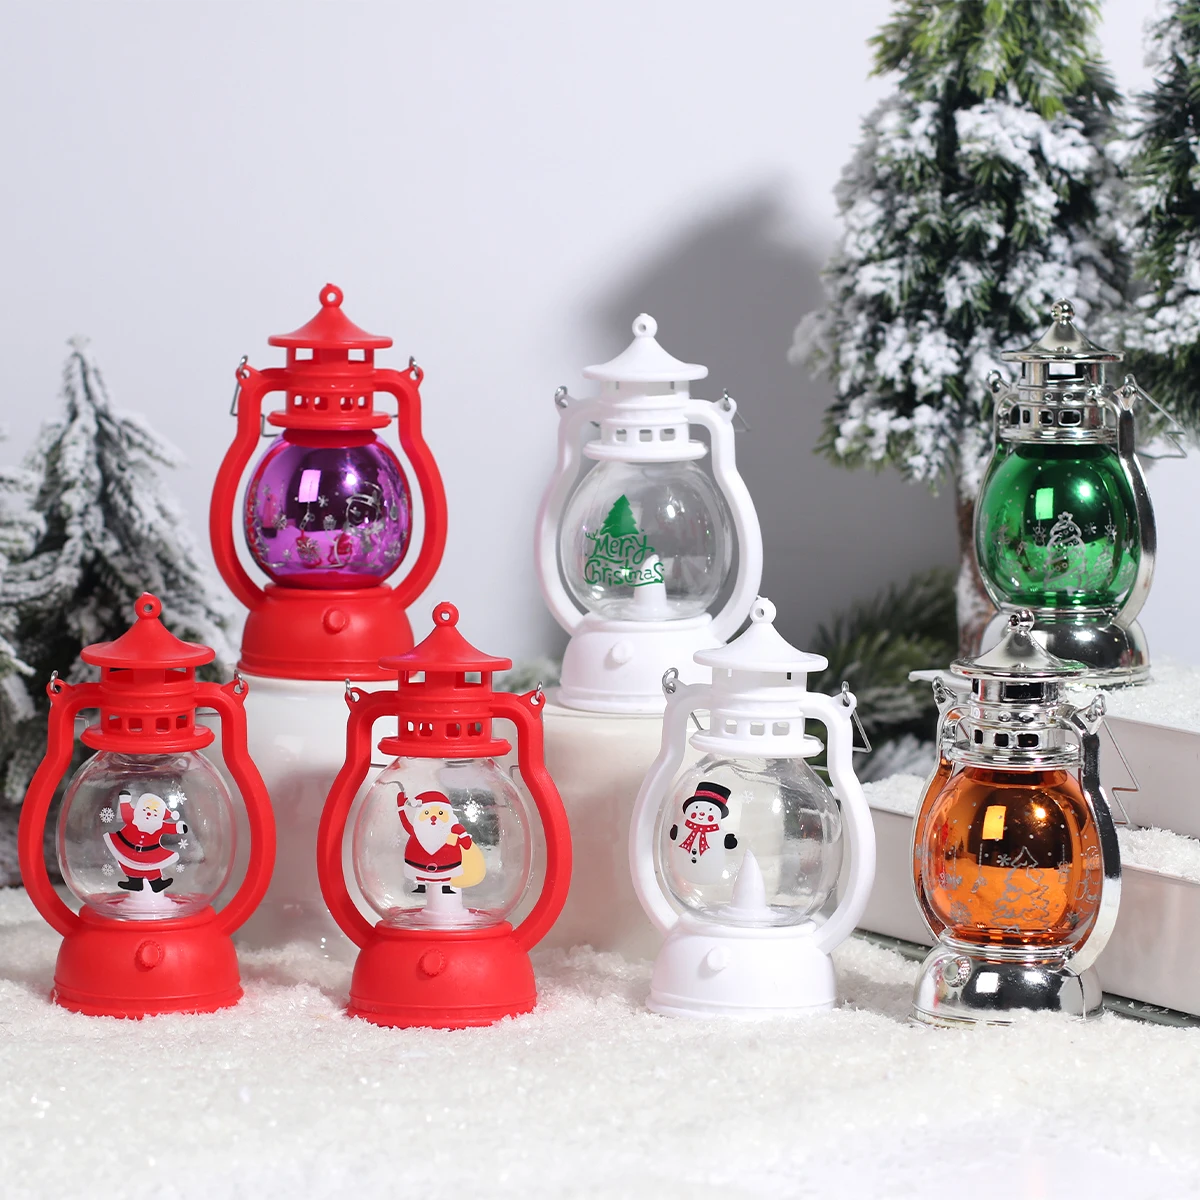 

Christmas Lantern Led Candle Tea light Candles Merry Christmas Decor For Home Xmas Tree Ornaments Santa Claus Elk Lamp New Year